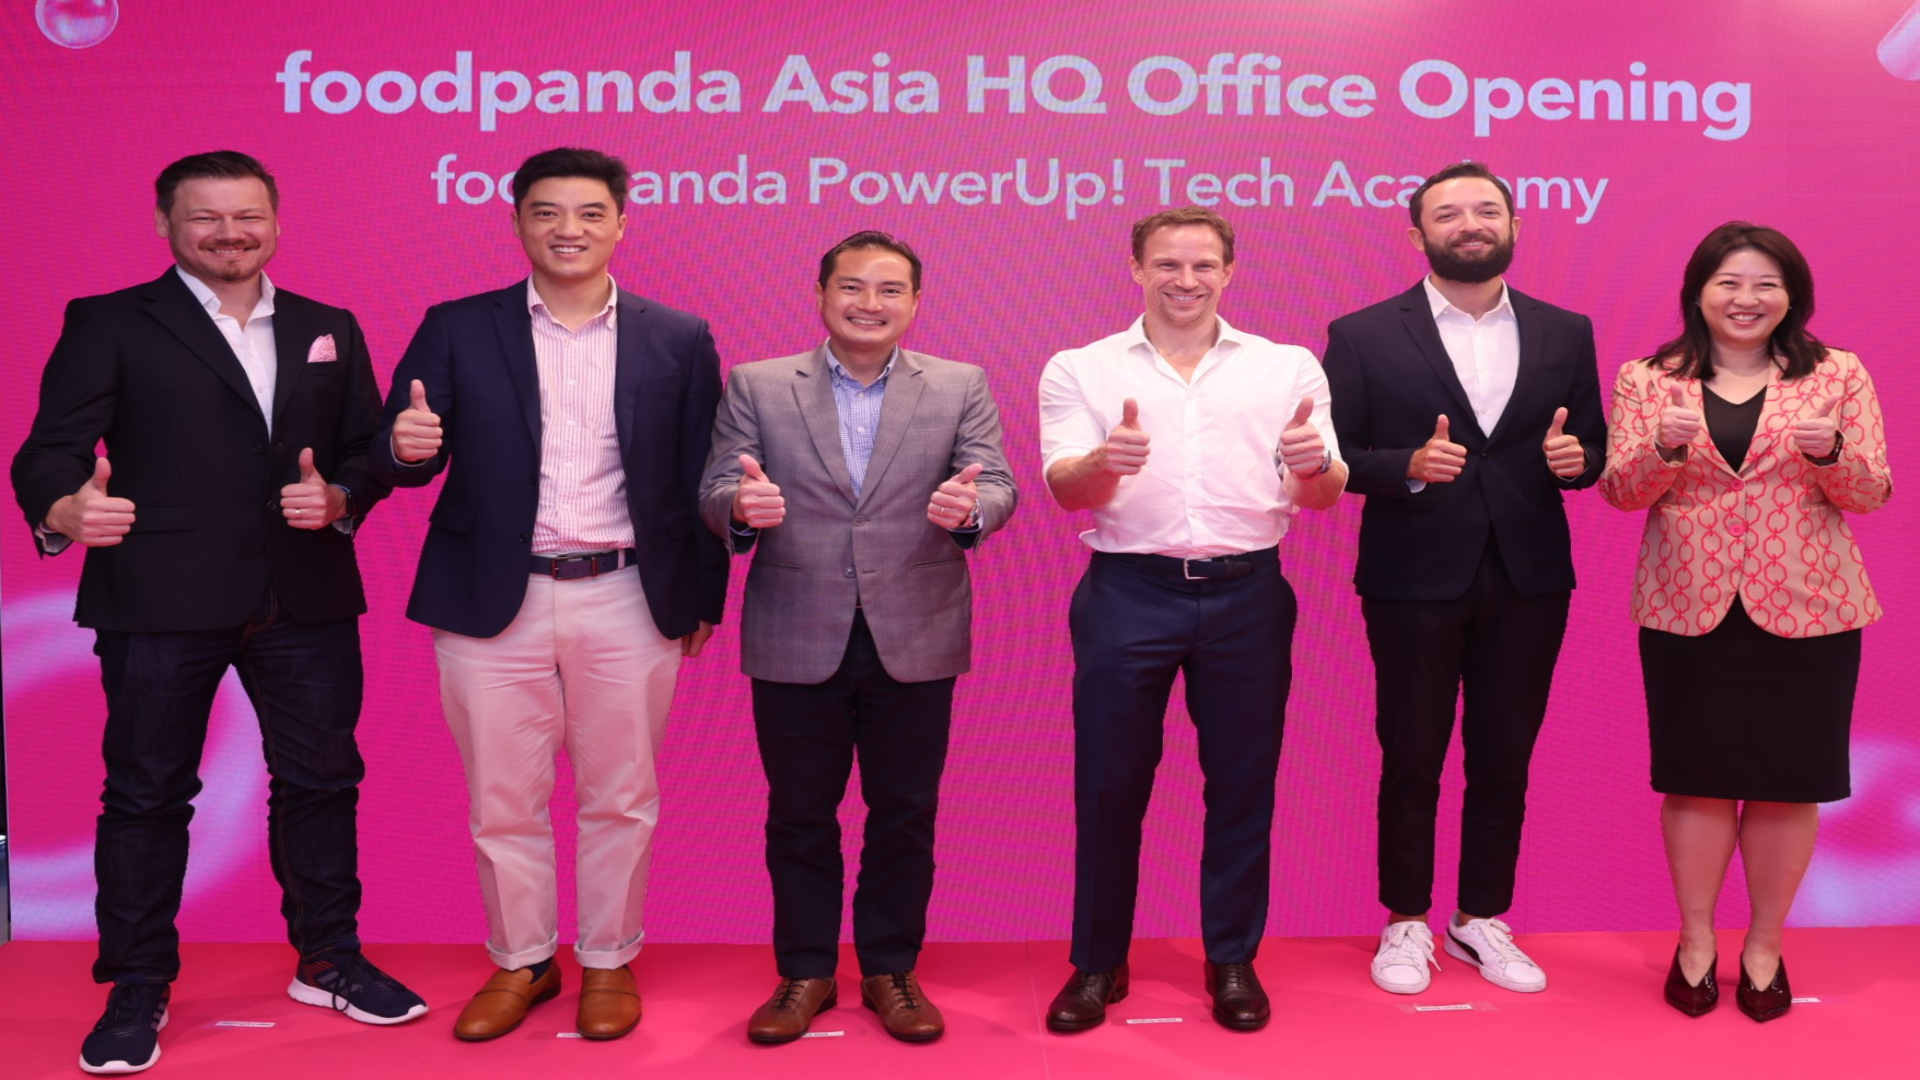 foodpanda marks 10th anniversary with new regional HQ in Singapore; launches foodpanda PowerUp! Tech Academy